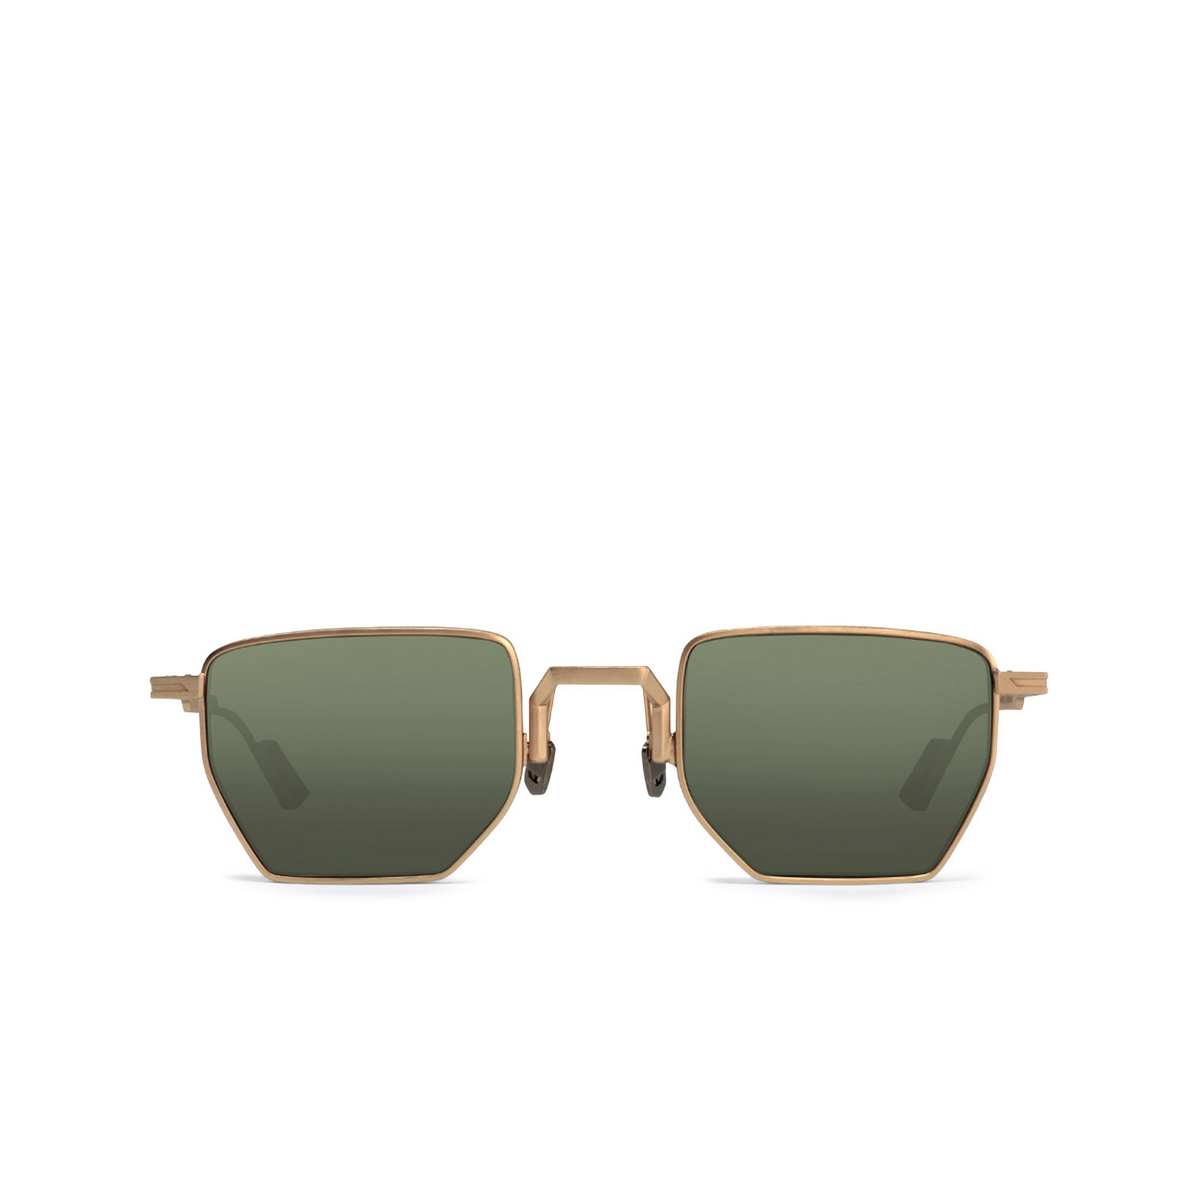 Movitra ALDO Sunglasses ROSE GOLD GREEN Rose Gold - front view